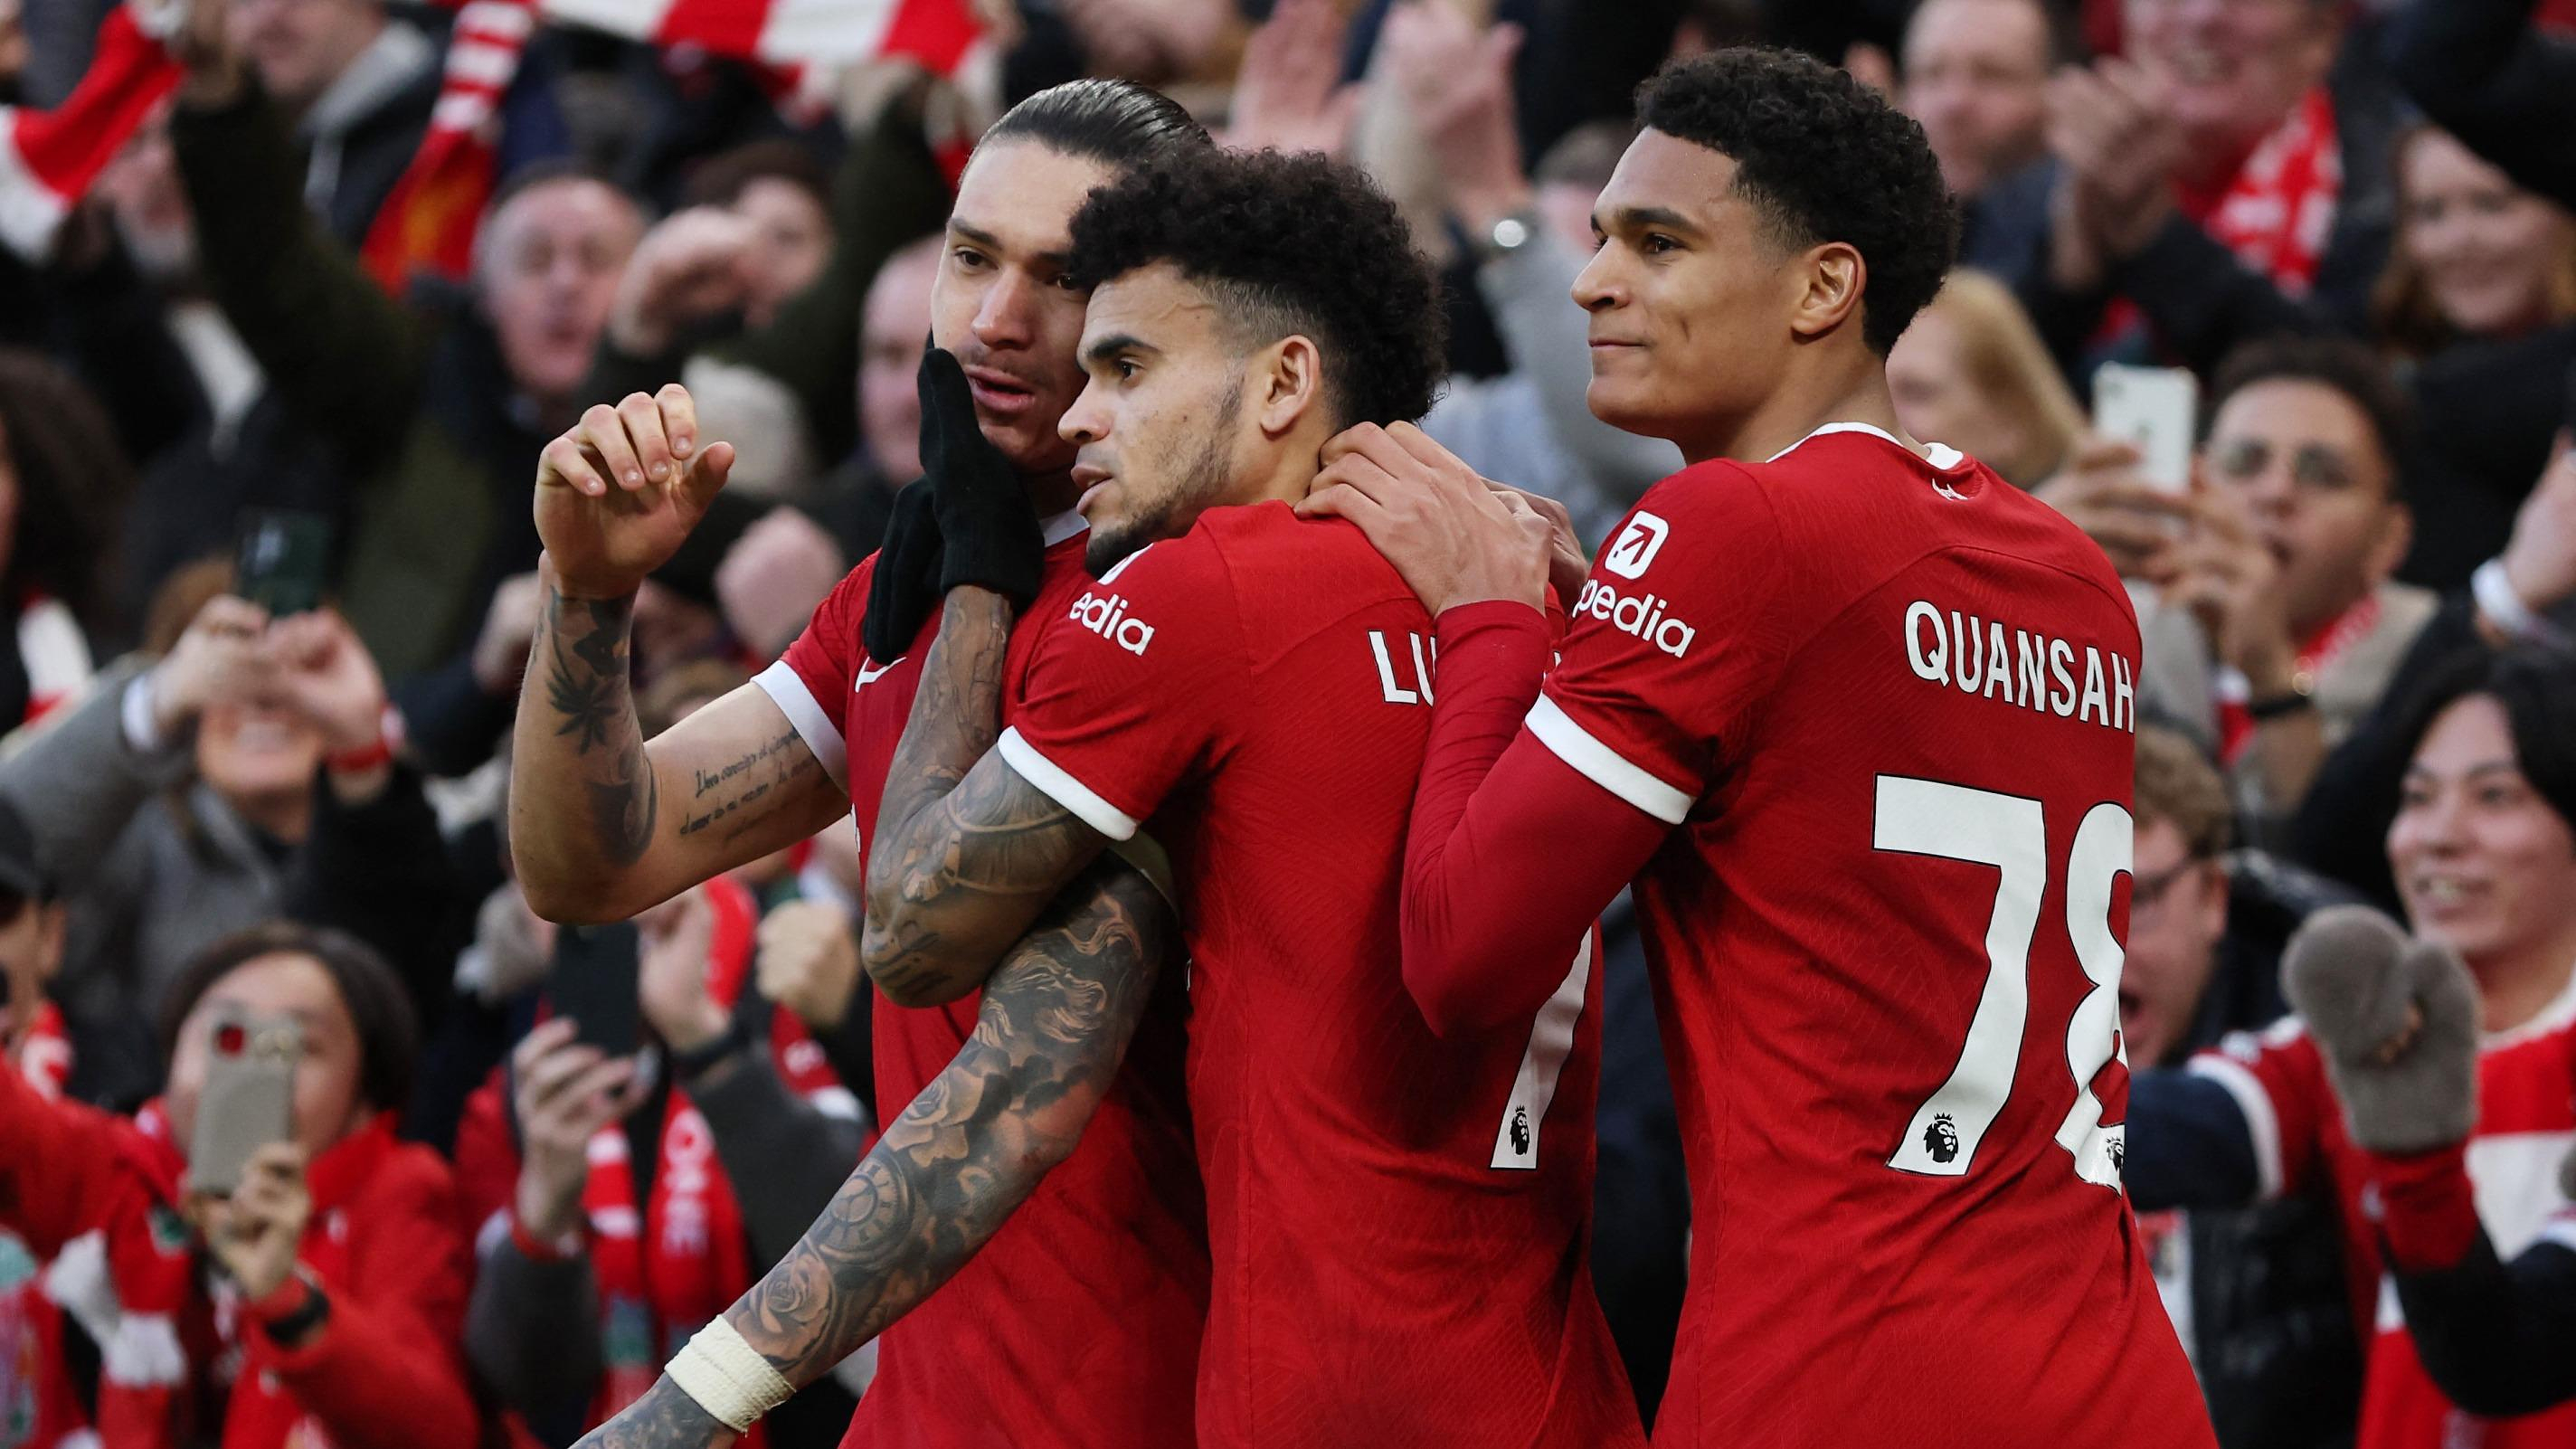 League Cup: why Liverpool are so strong this season